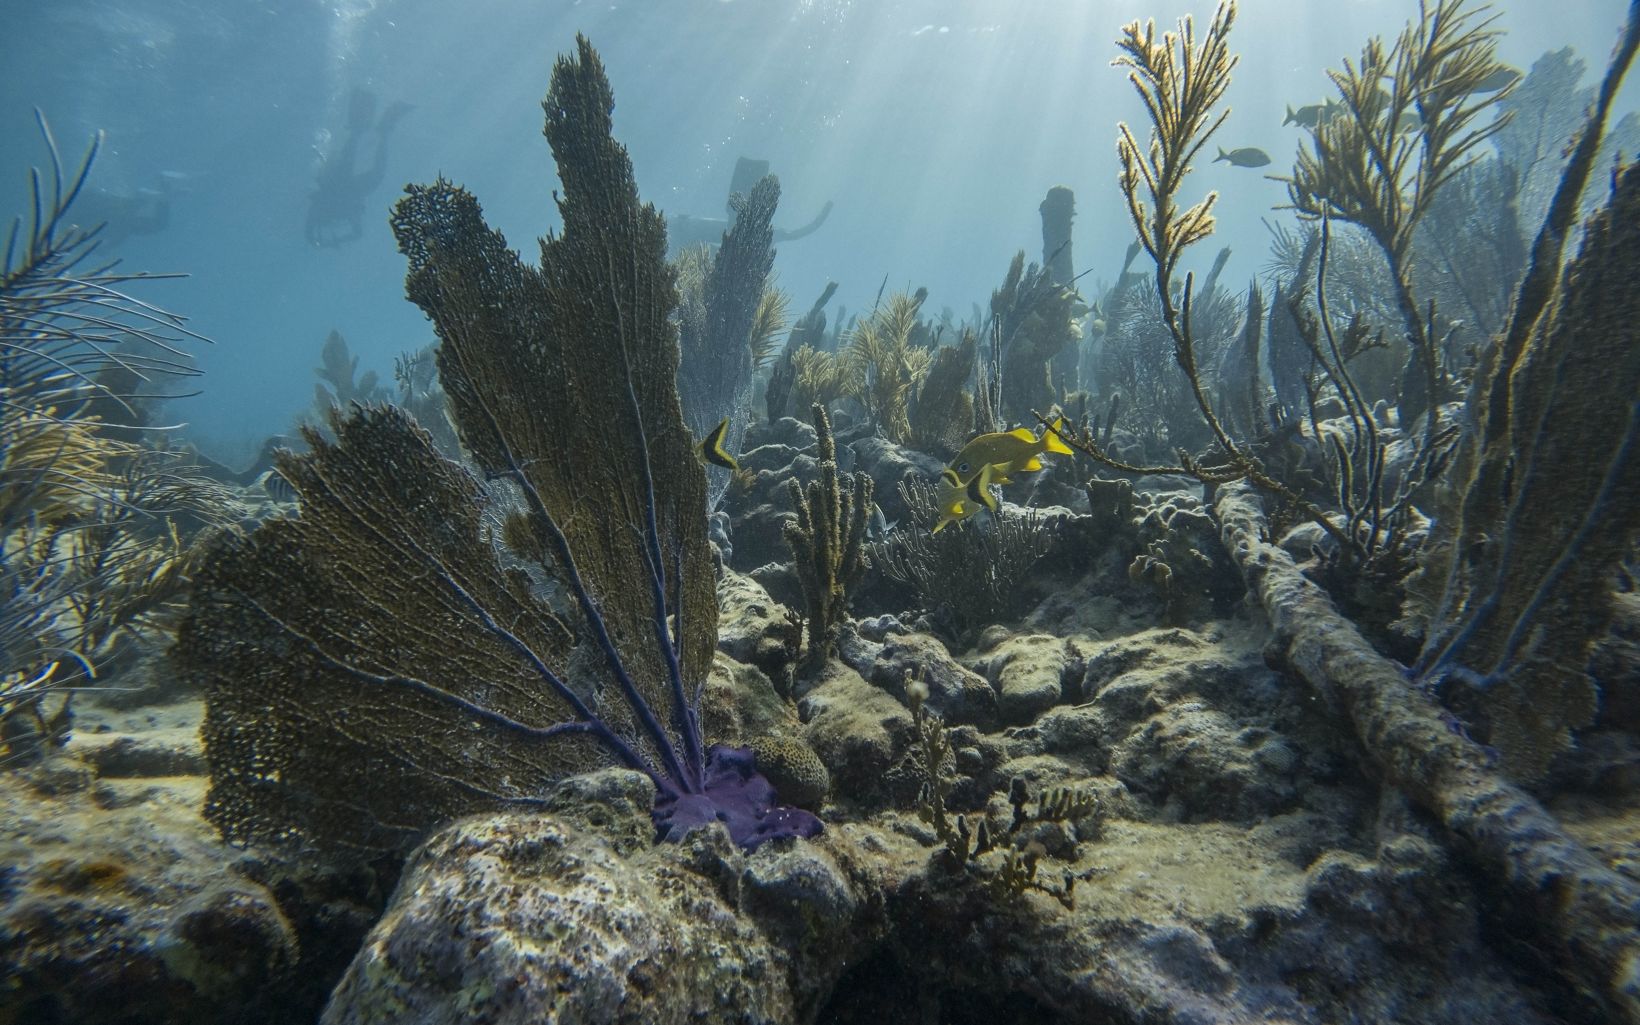 Key Largo coral reef We want coral reefs to thrive and persist well beyond this century.  © Brendan Hall